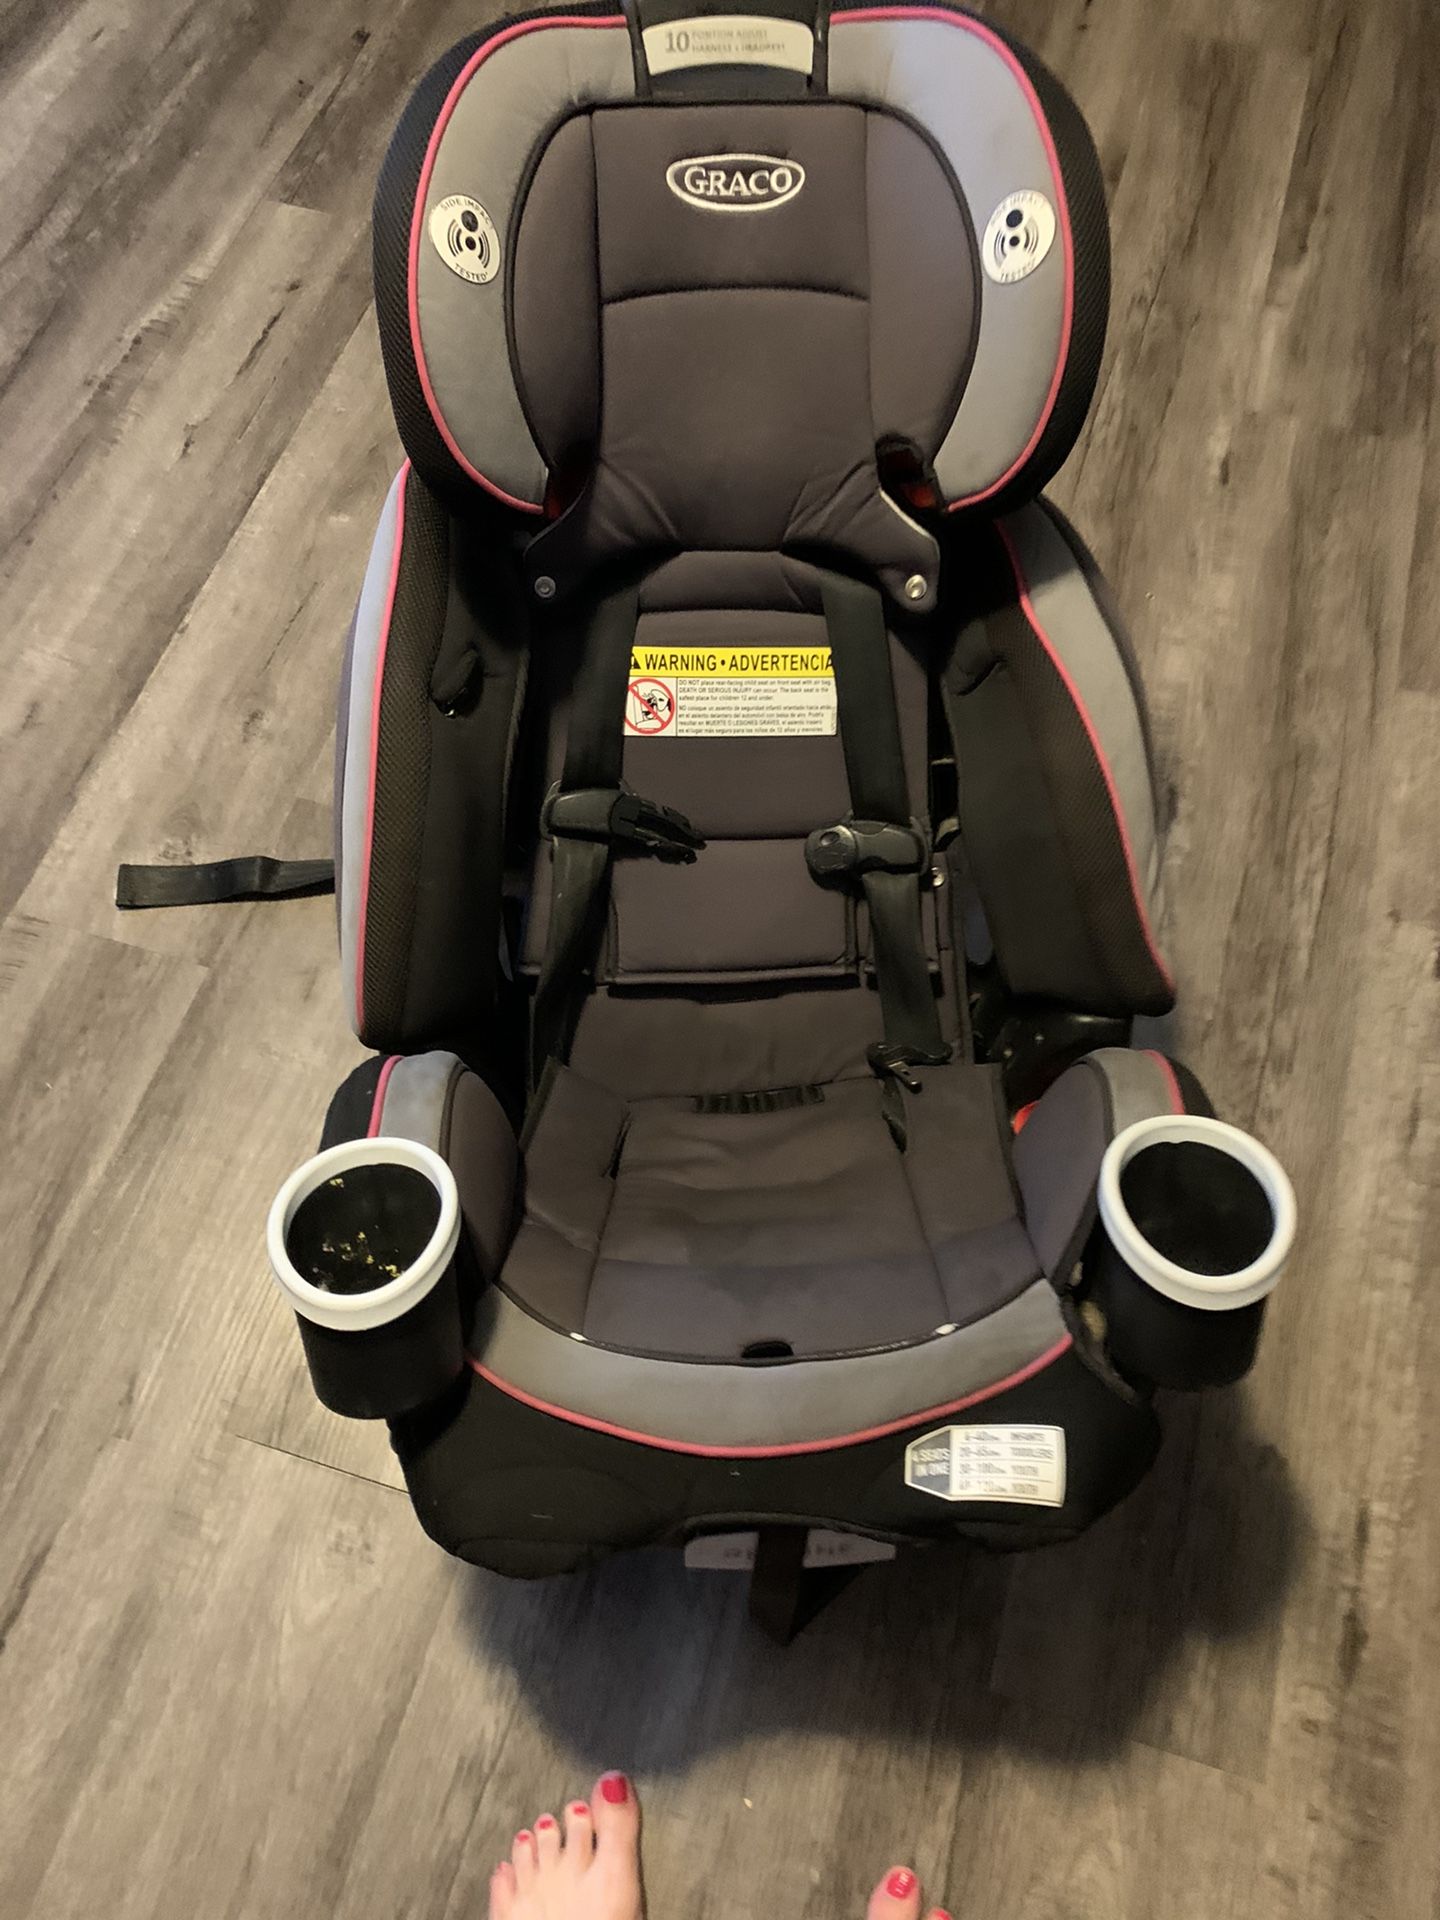 Graco forever car seat